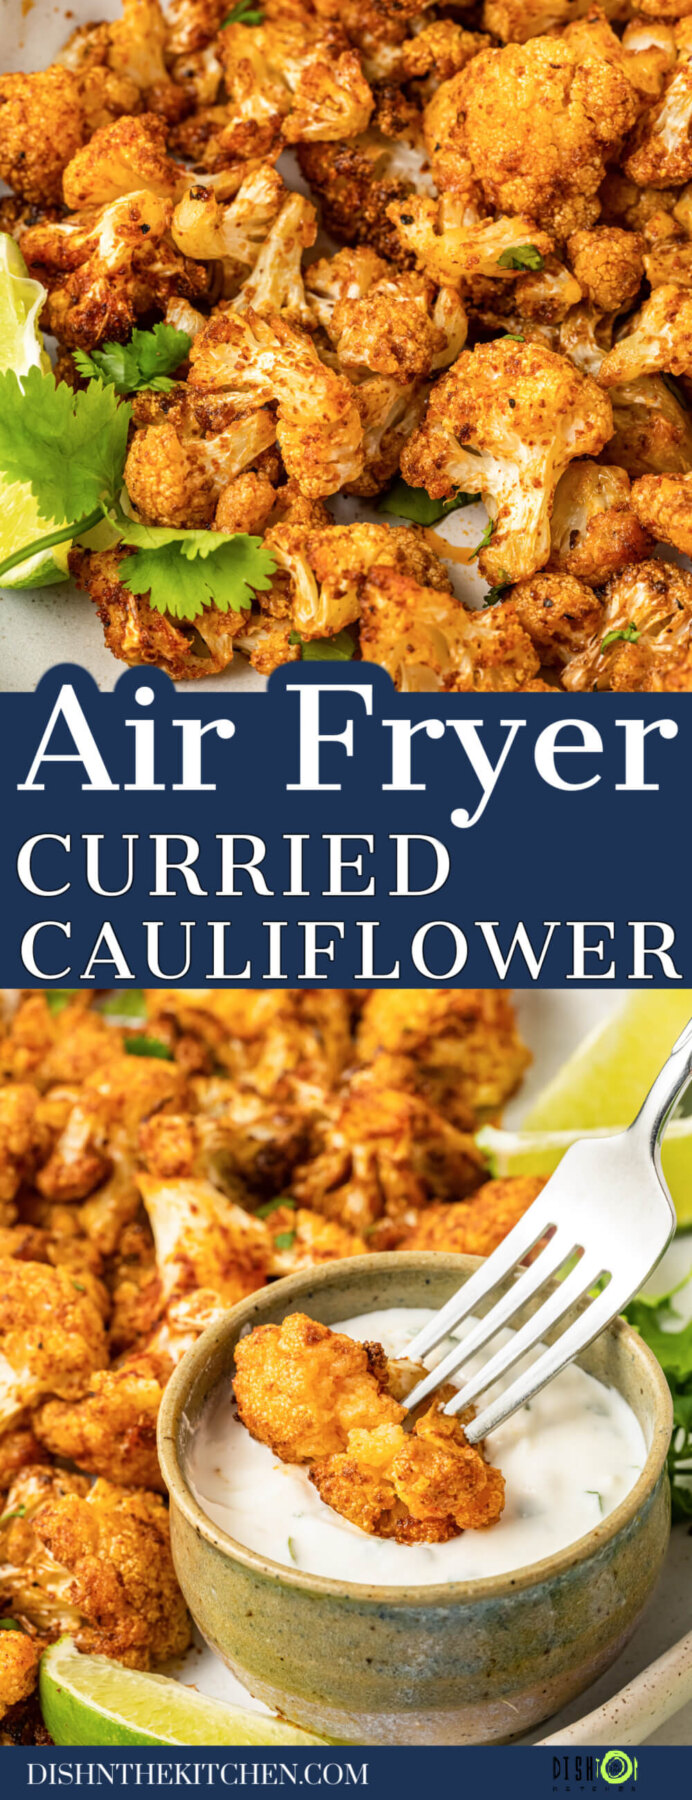 Pinterest image featuring vibrant curried air fried cauliflower and creamy dip.